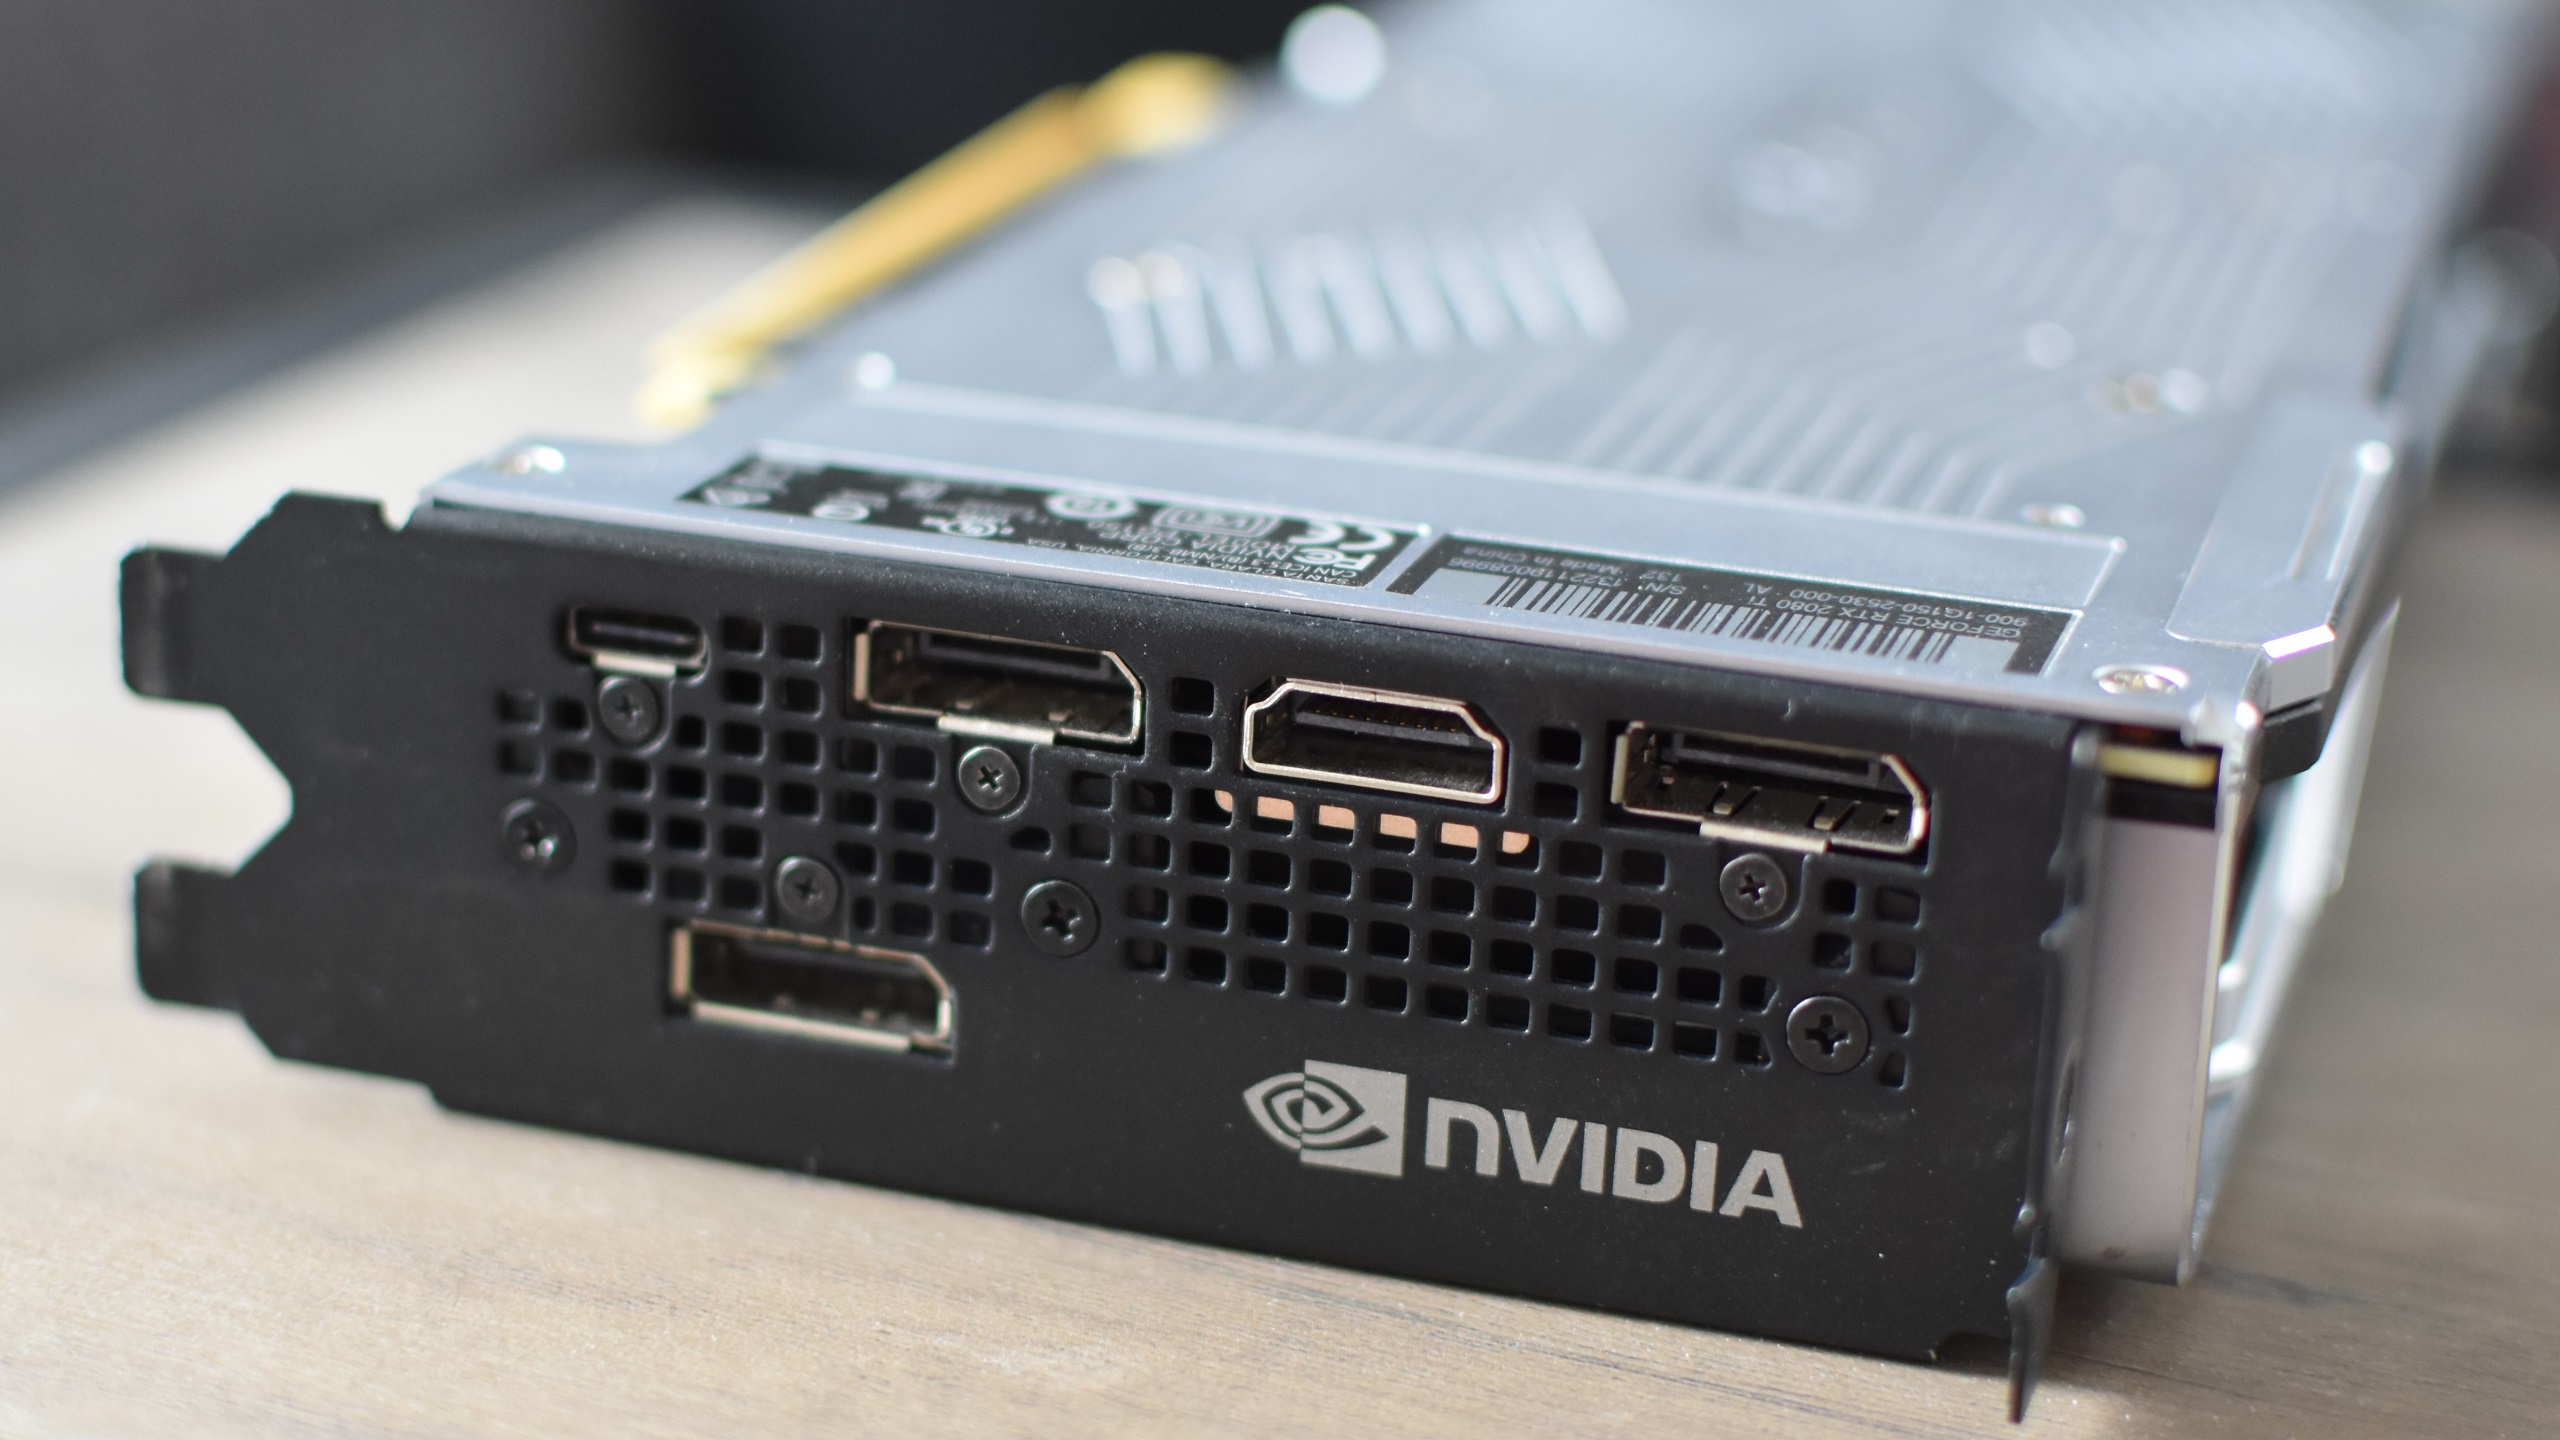 The display output ports on the back of an Nvidia GeForce RTX 2080 Ti graphics card.